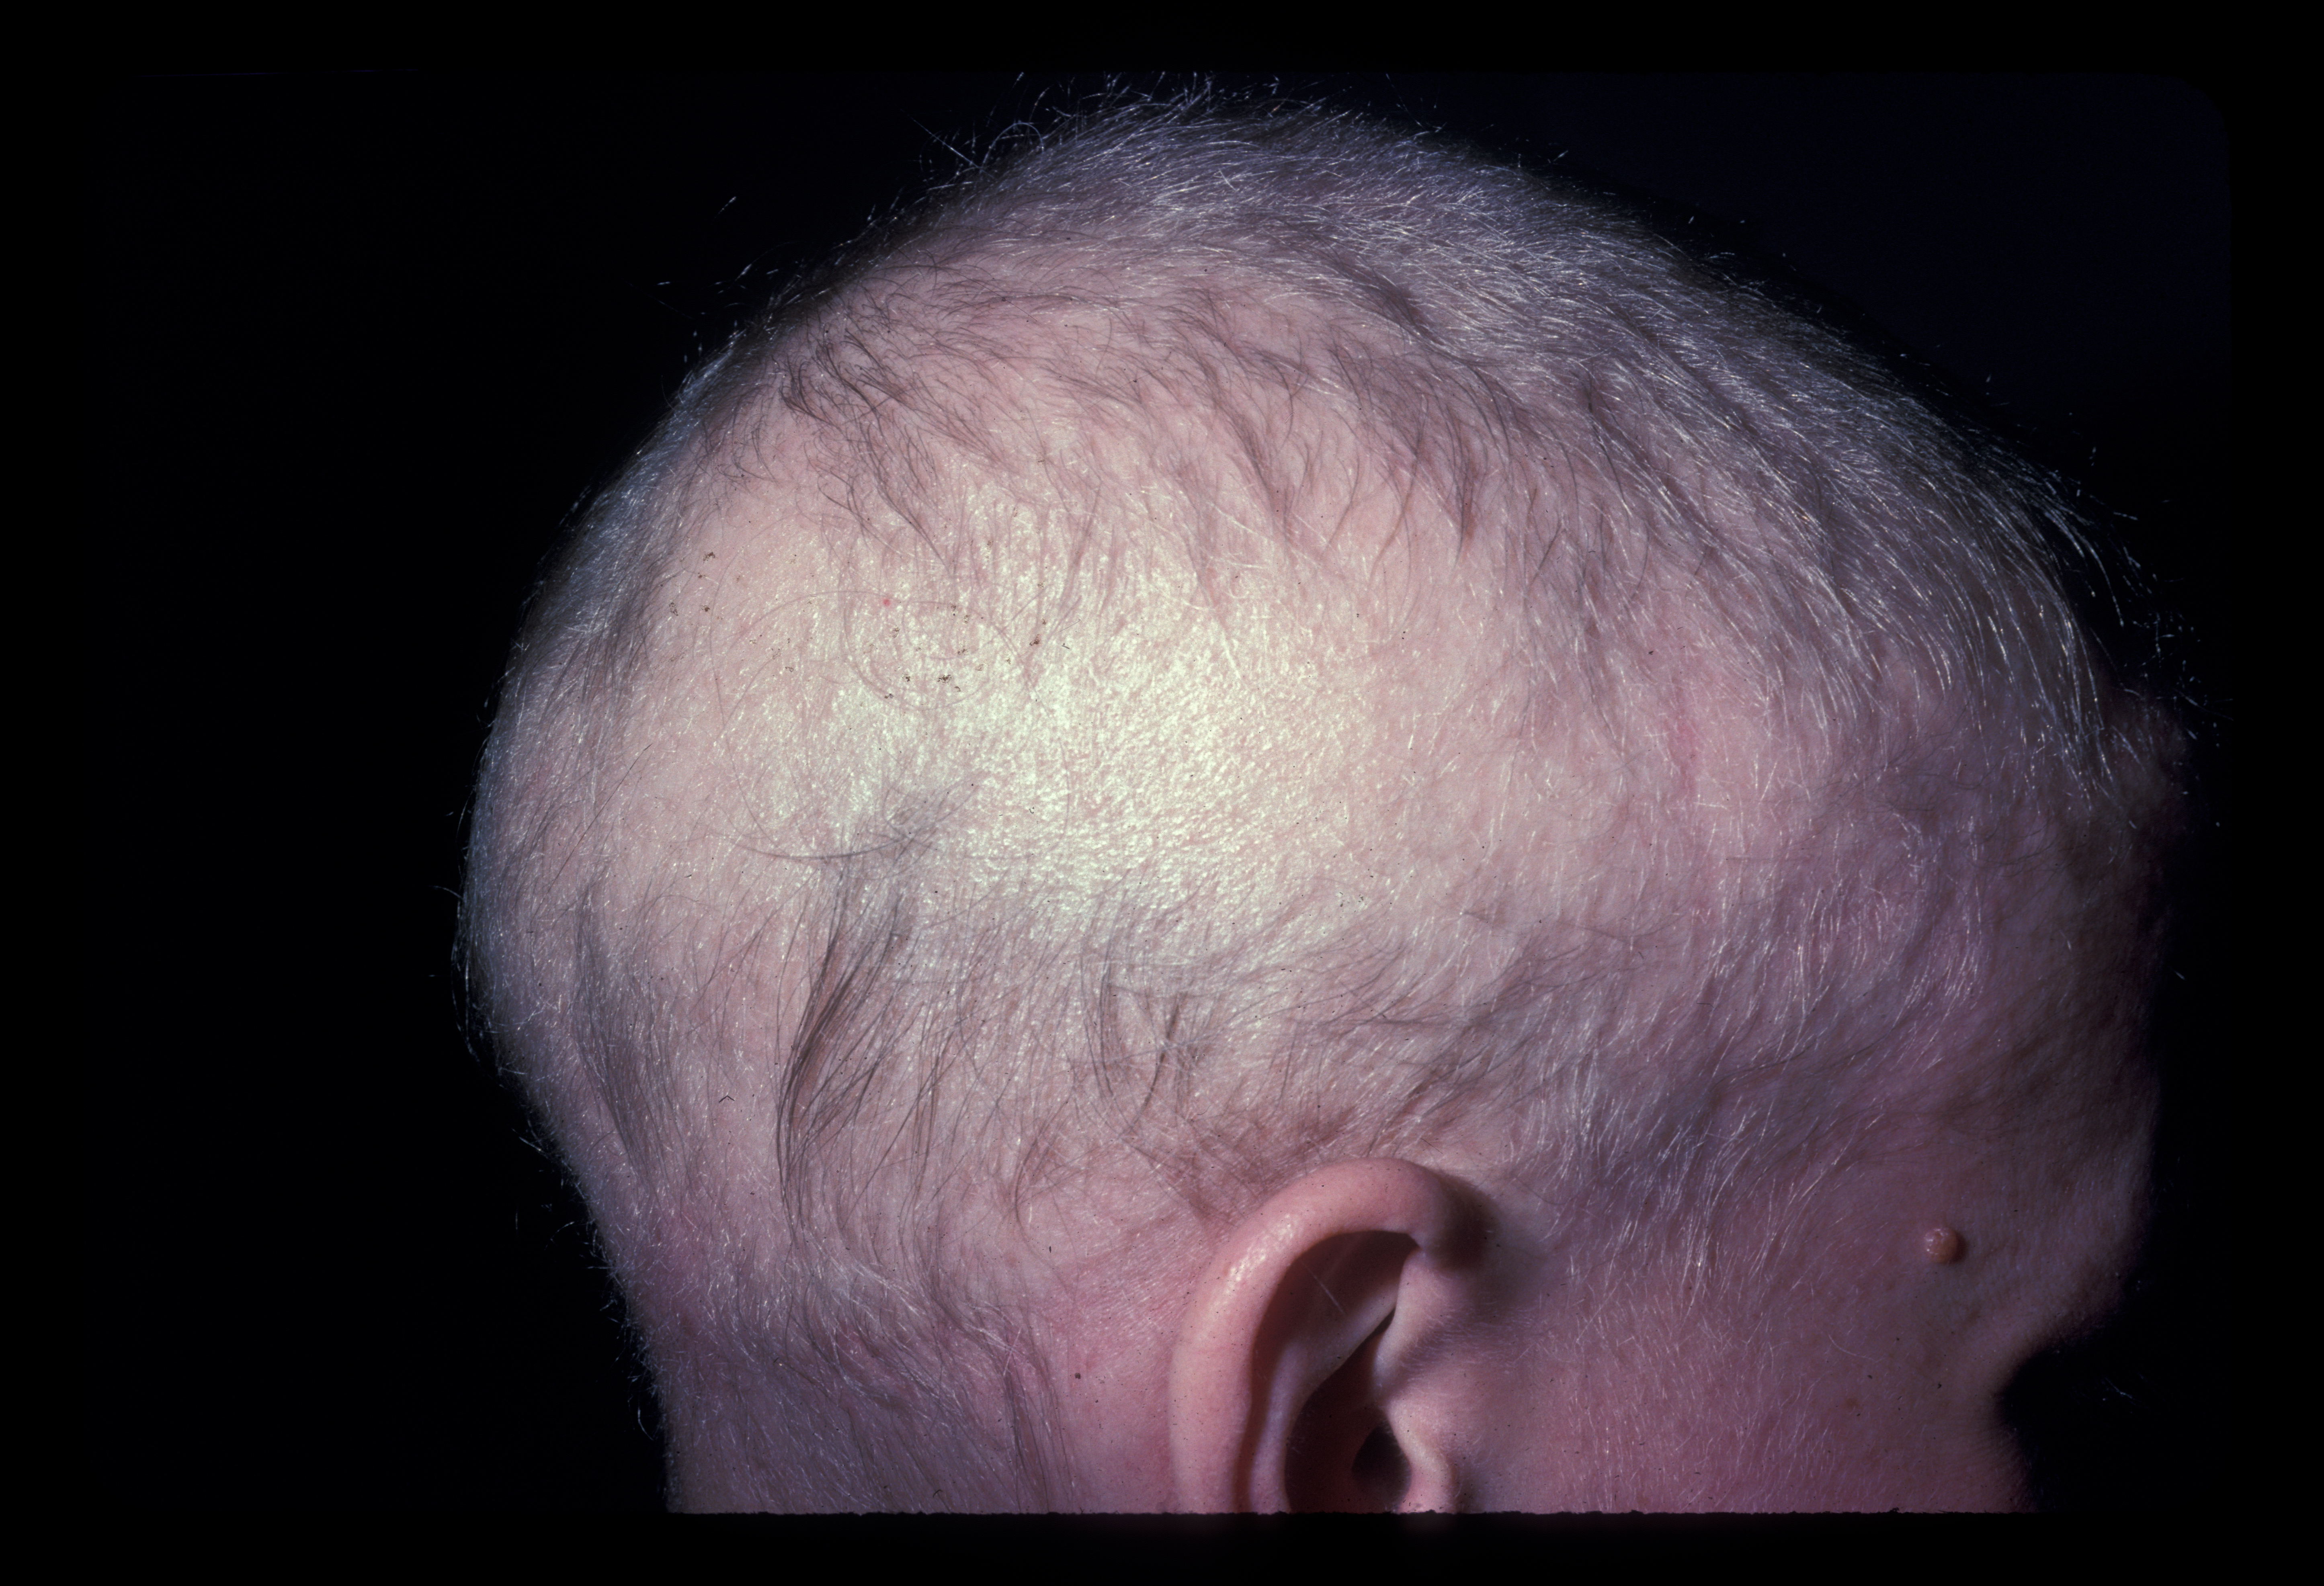 Alopecia totalis with some regrowth.